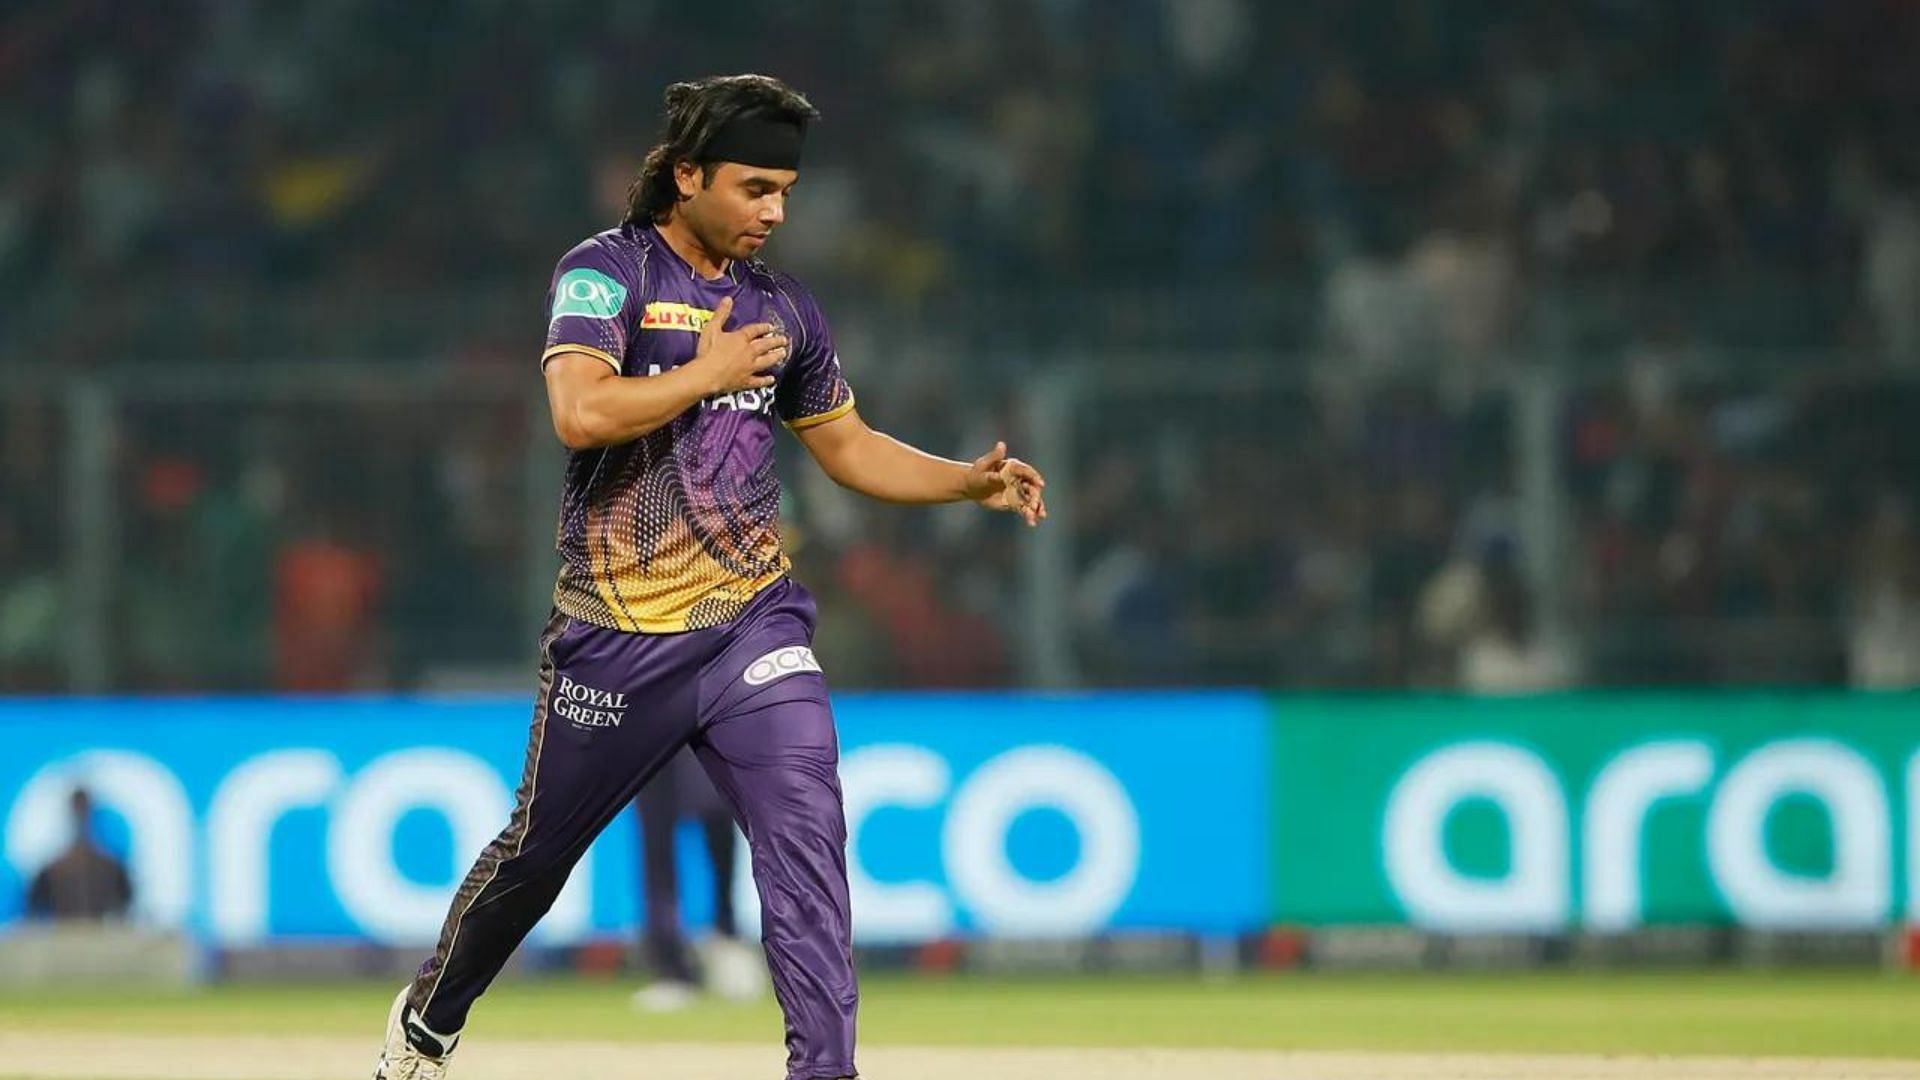 Suyash Sharma had an incredible IPL debut, picking up three wickets against RCB (P.C.:iplt20.com)